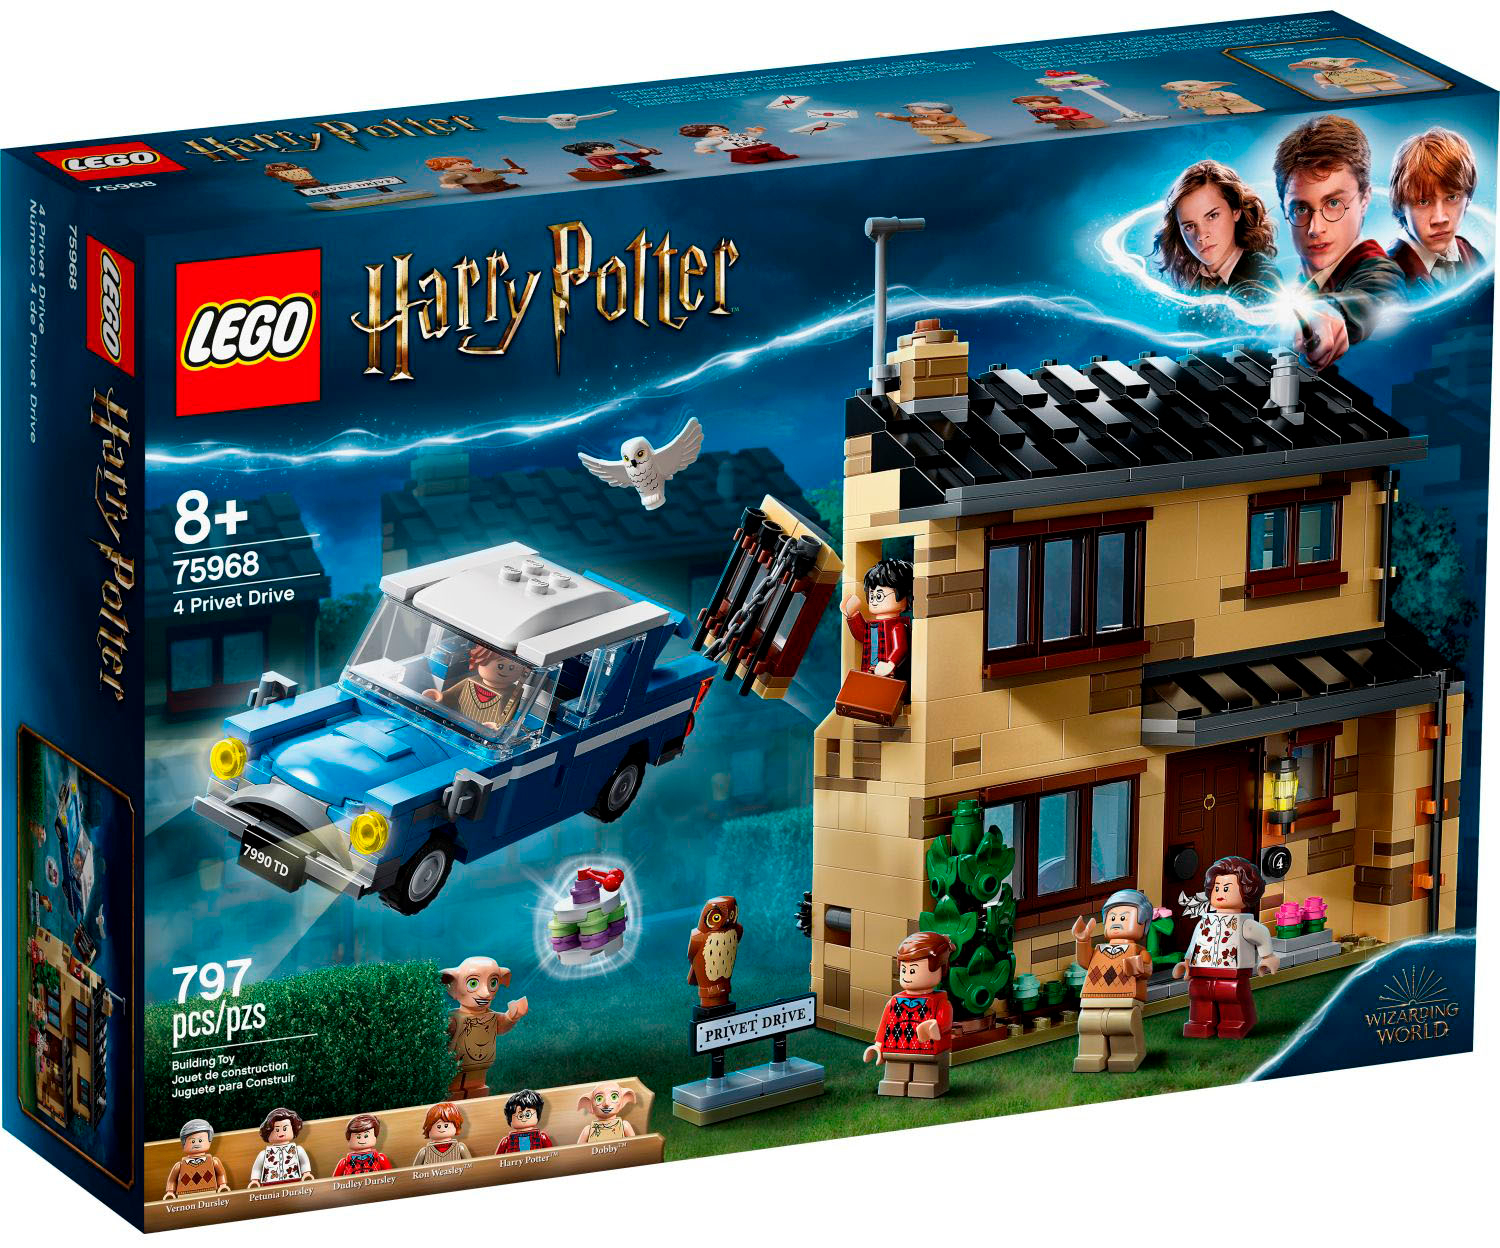 LEGO Harry Potter: Years 1-4 at the best price